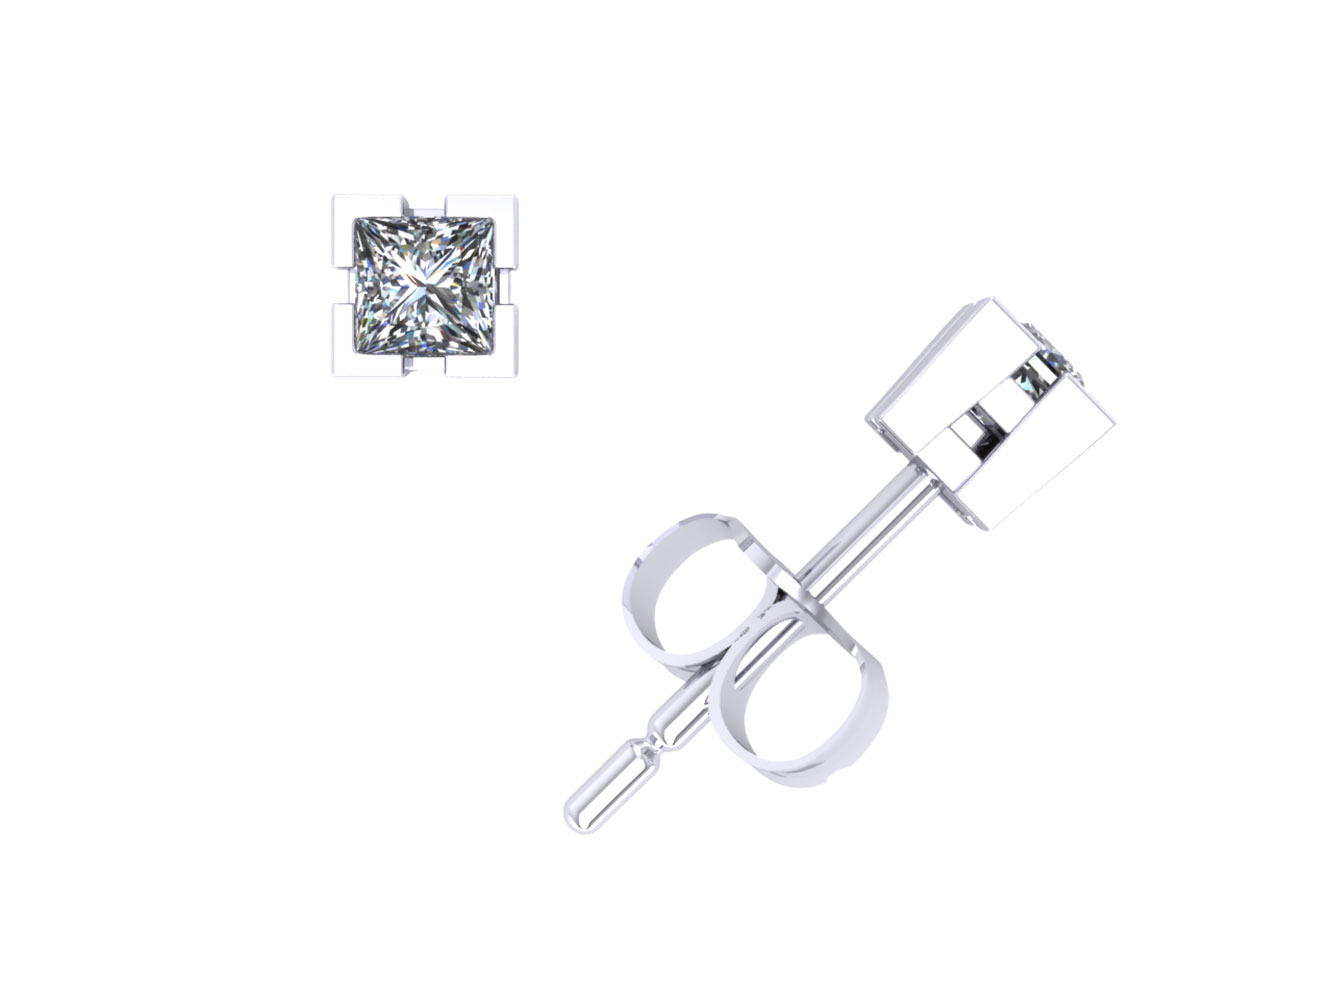 Jewel We Sell Genuine 0.2Ct Princess Cut Diamond Stud Earrings 14k White or Yellow Gold V-Prong H SI2